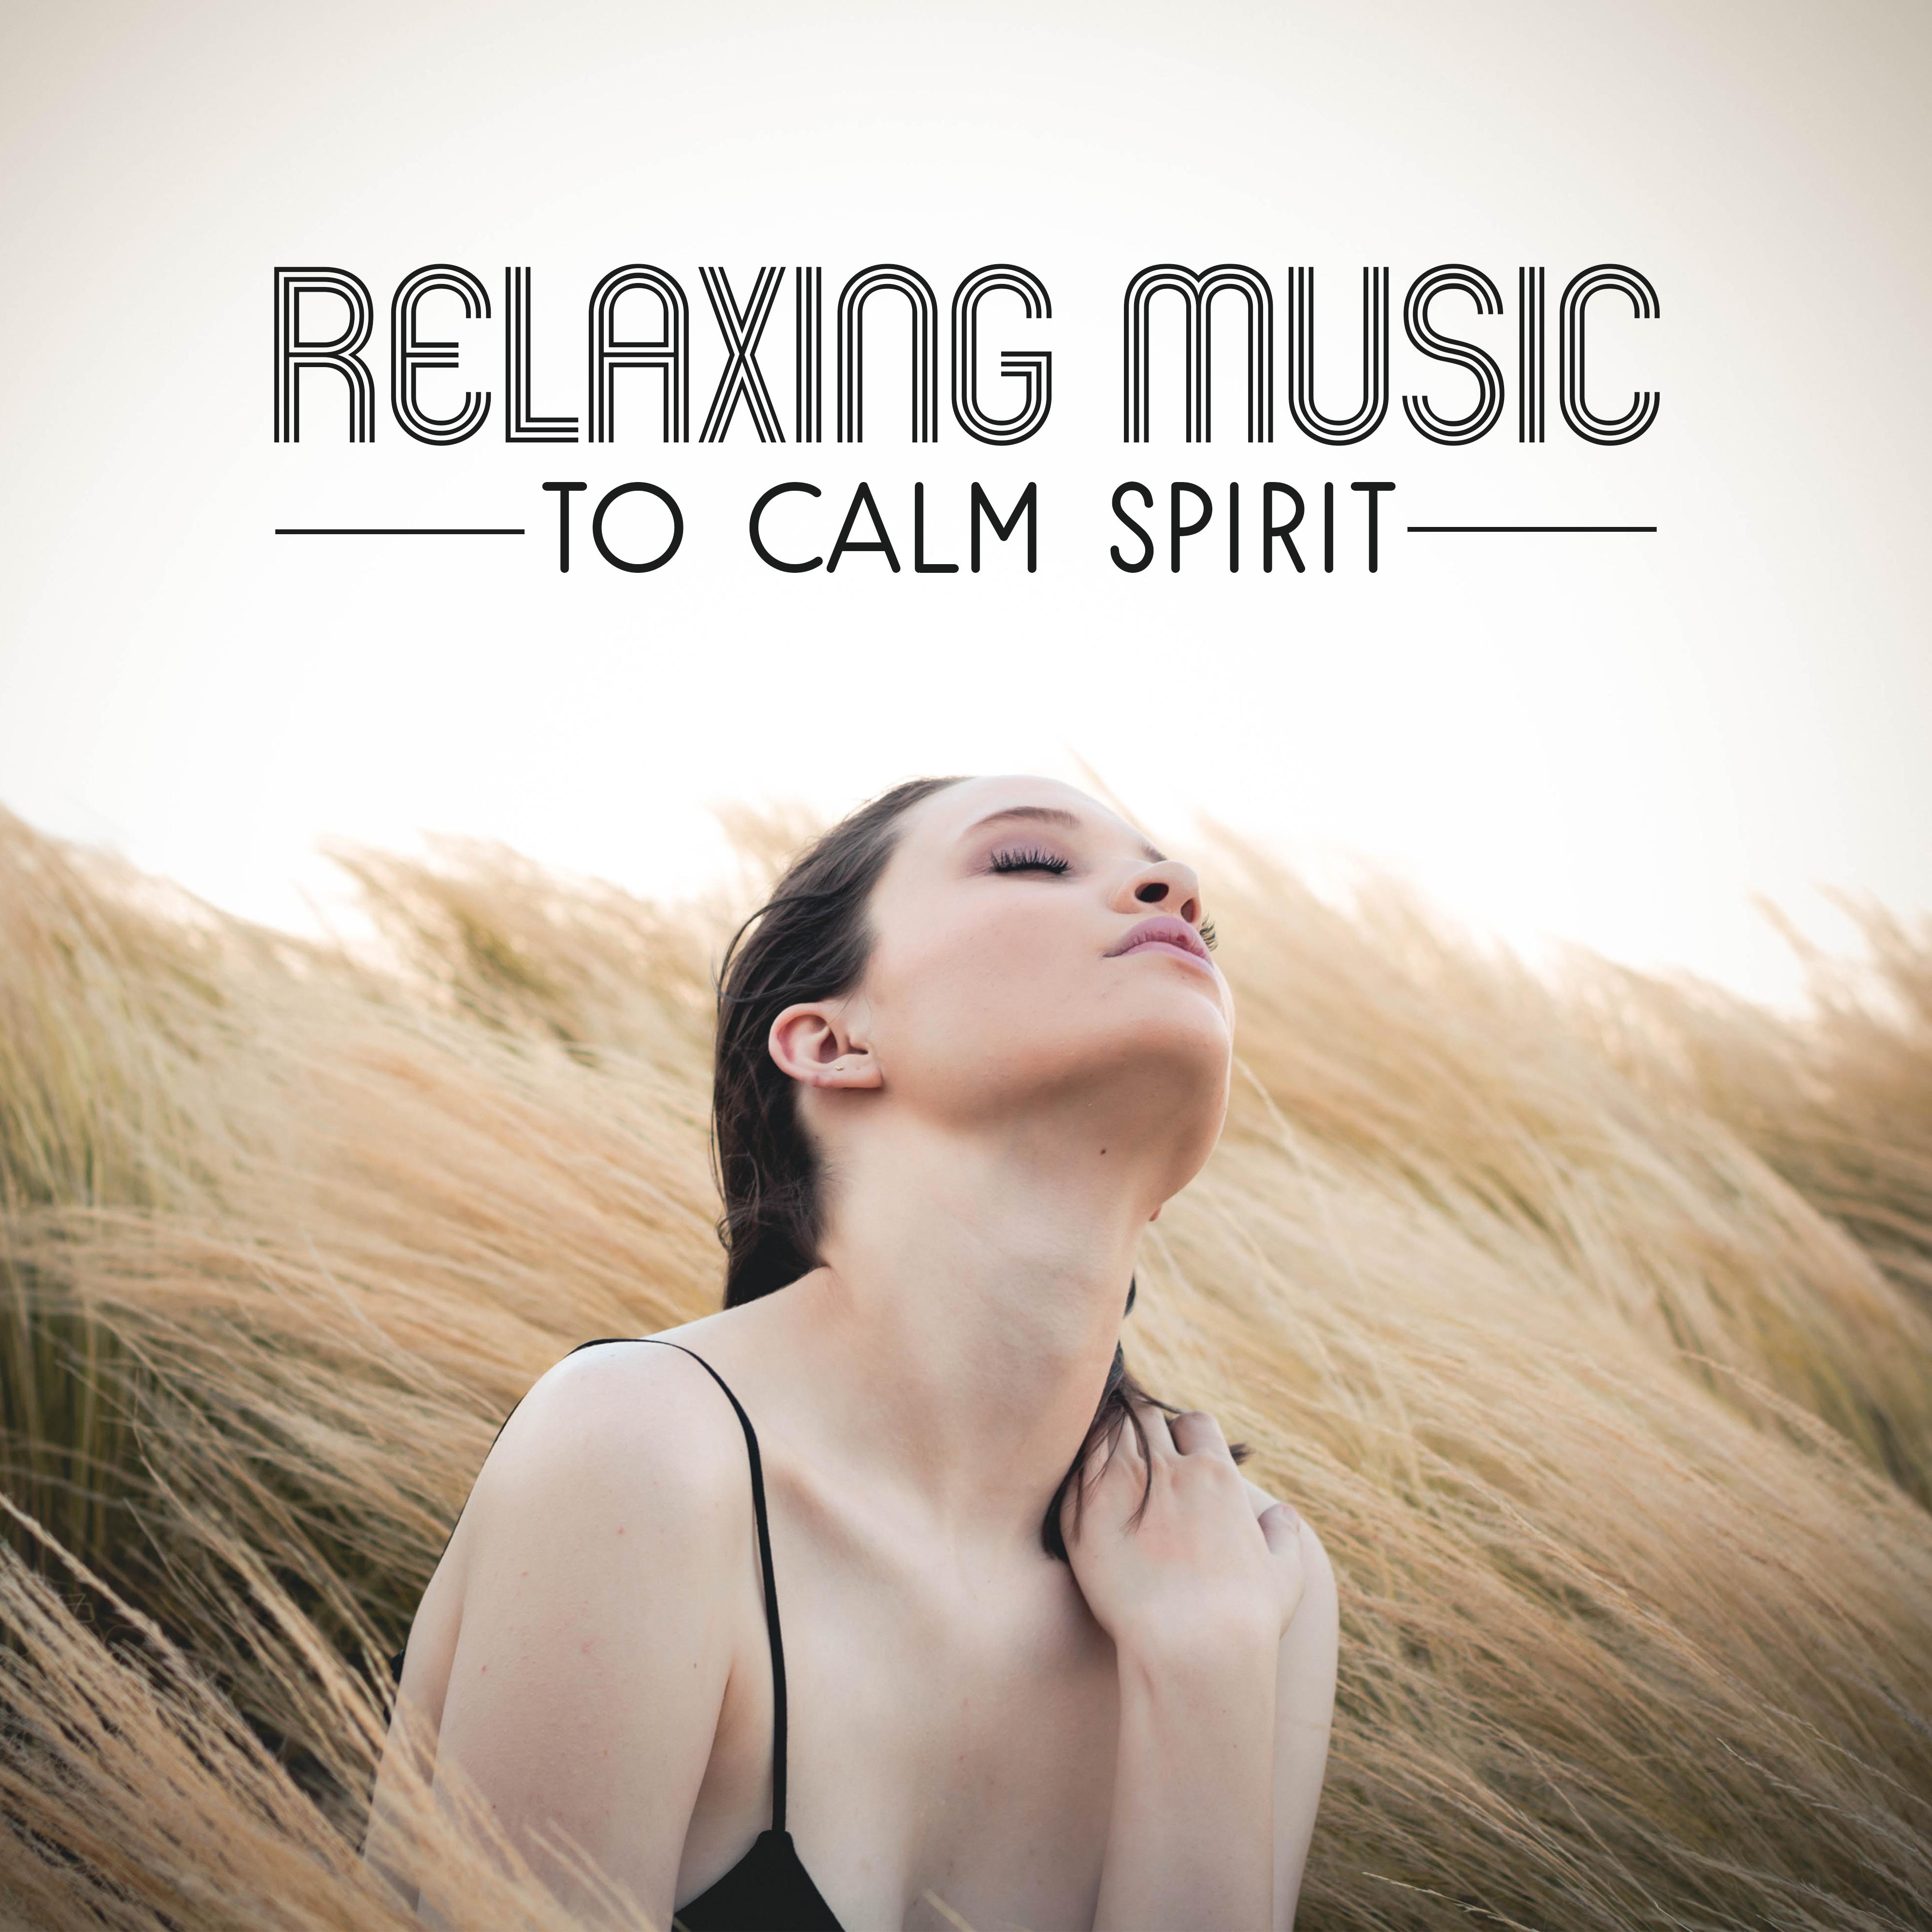 Relaxing Music to Calm Spirit  Easy Listening, Stress Relief, Music to Calm Down, Chilled Sounds